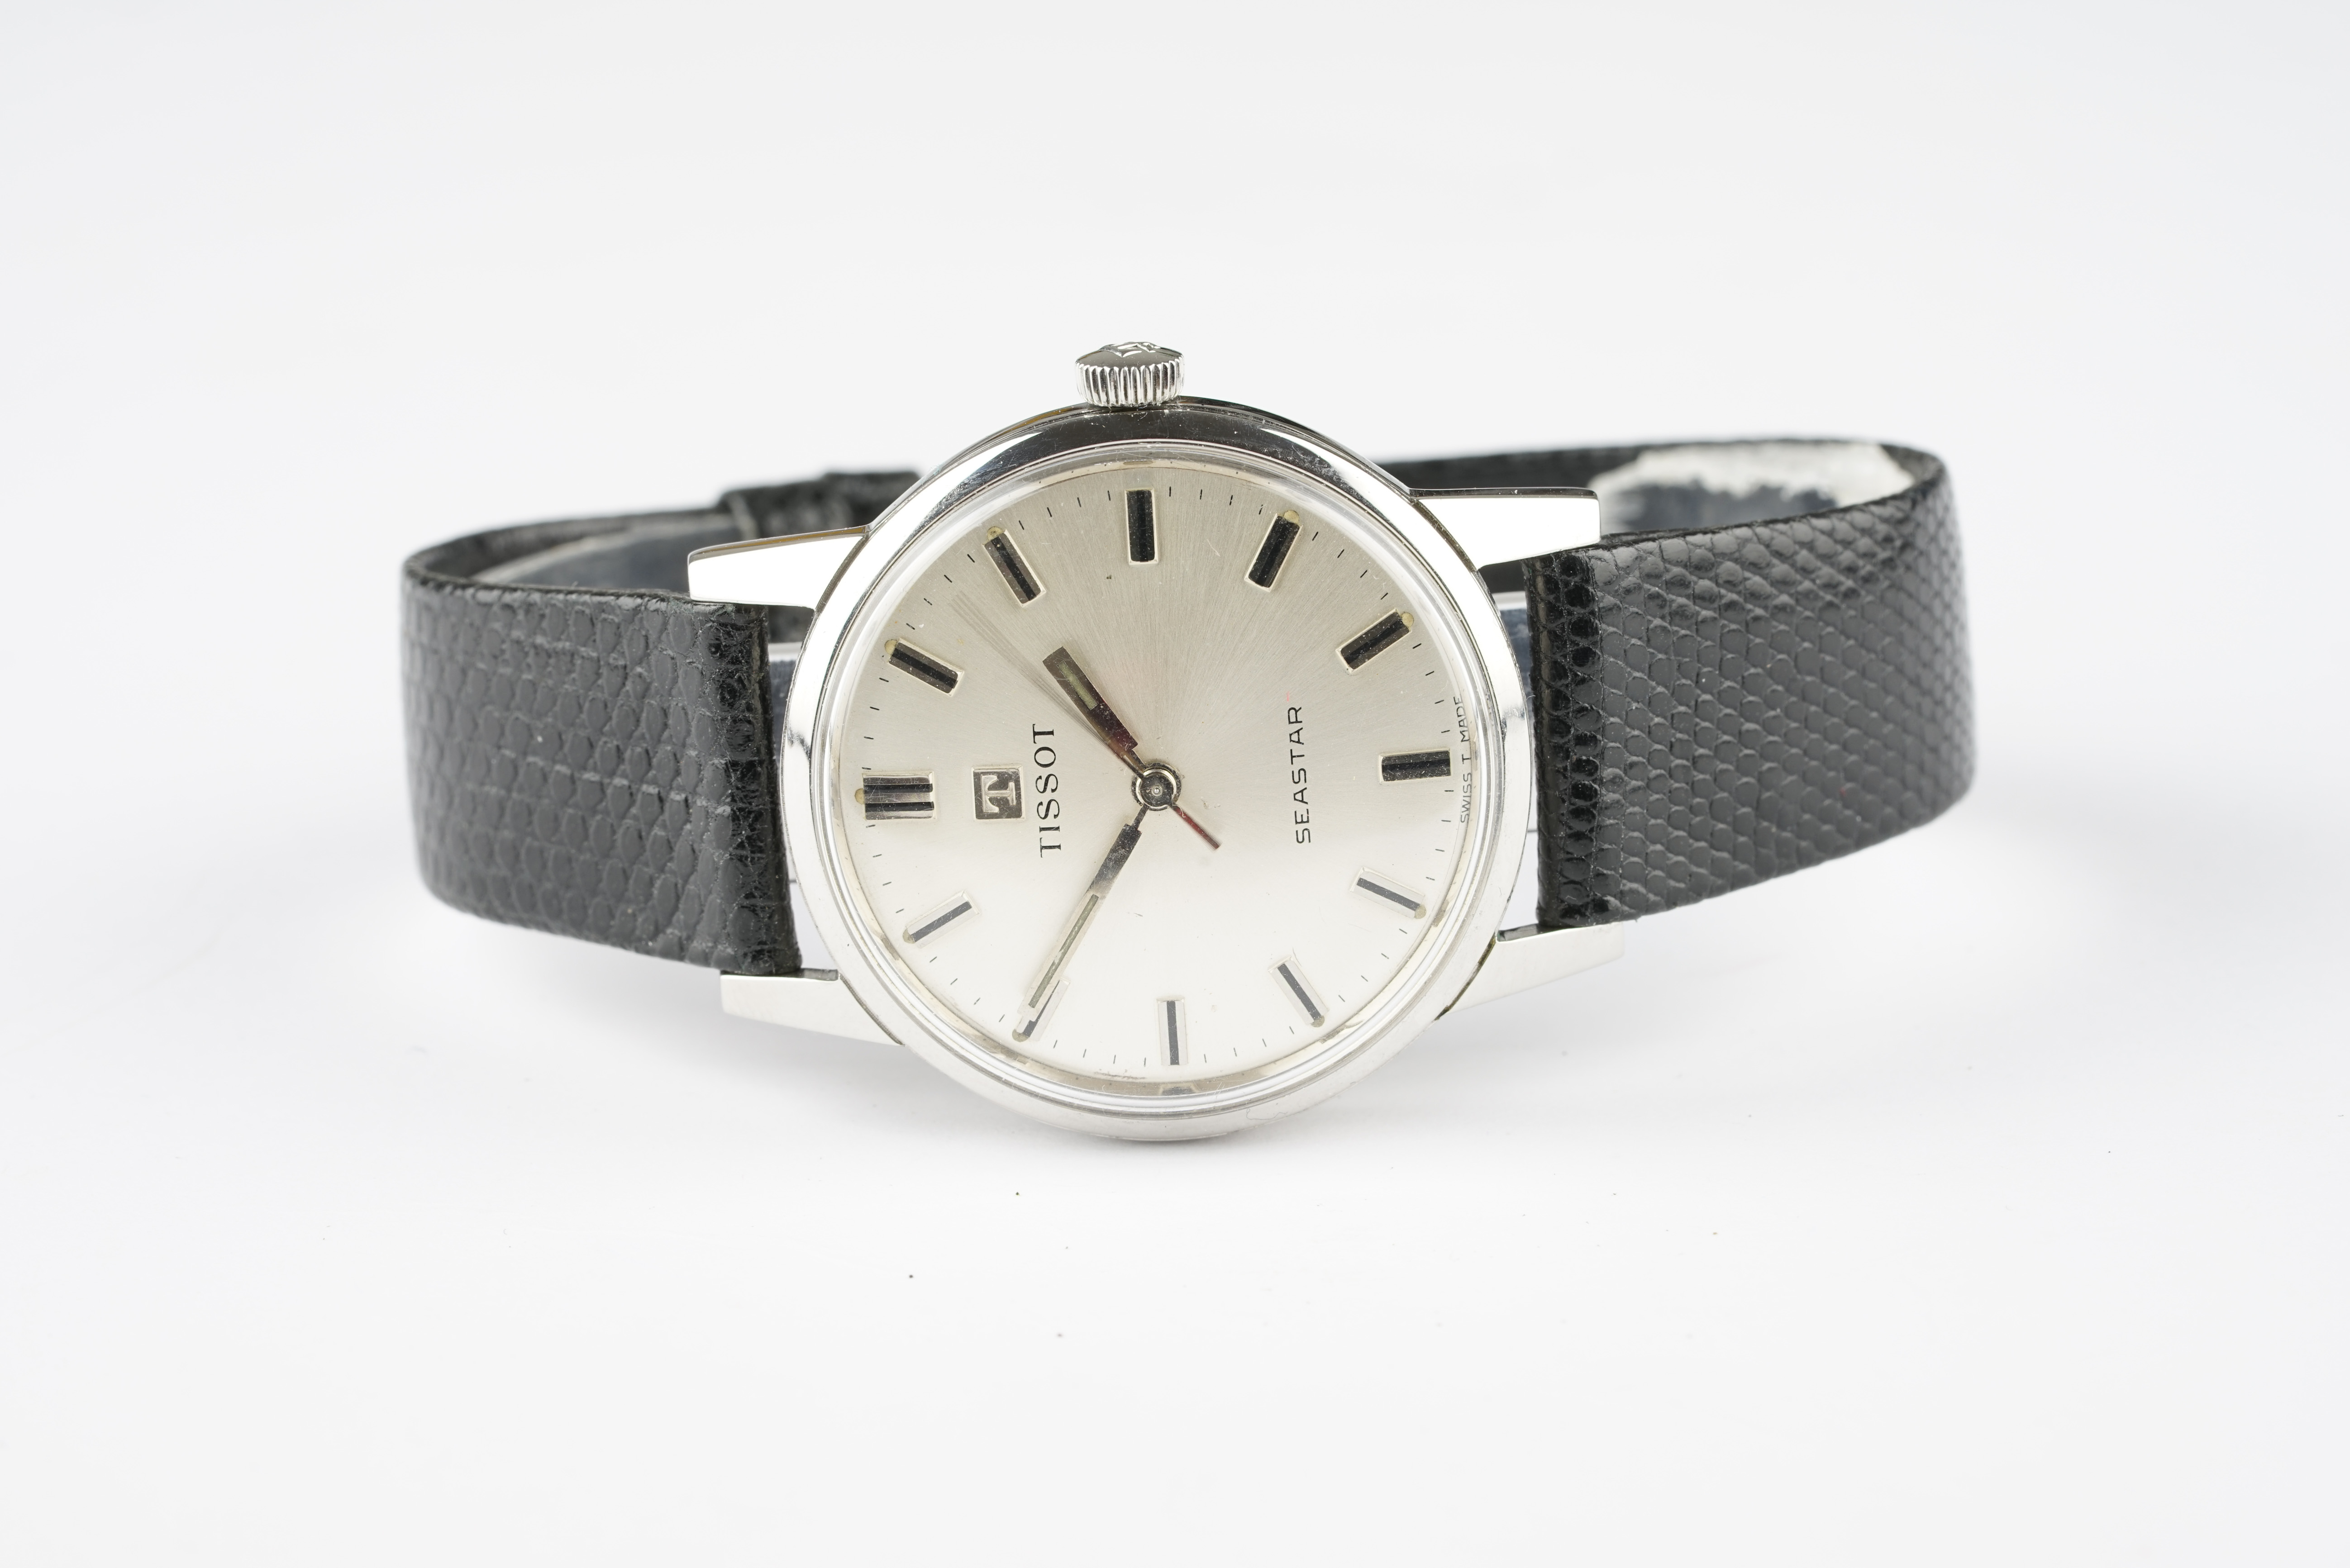 GENTLEMENS TISSOT SEASTAR WRISTWATCH REF. 41/42556-2, circular silver dial with stick hour markers